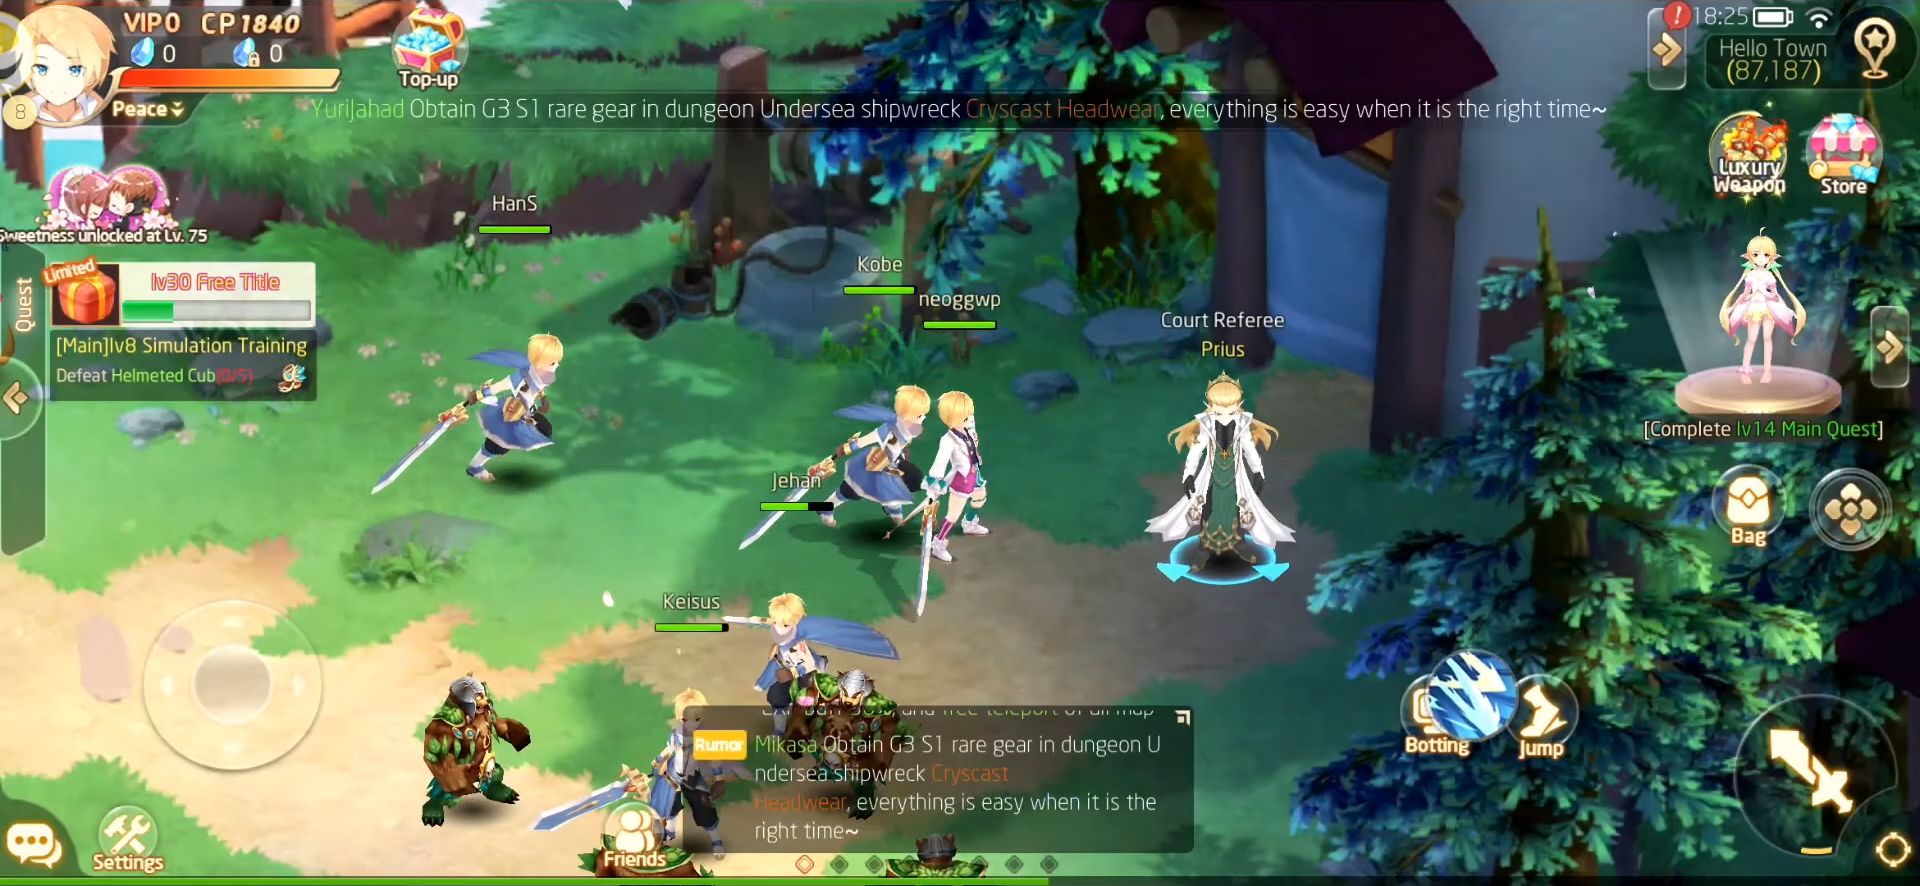 Lost Eure Infinite Farming MMORPG mobile android iOS apk download